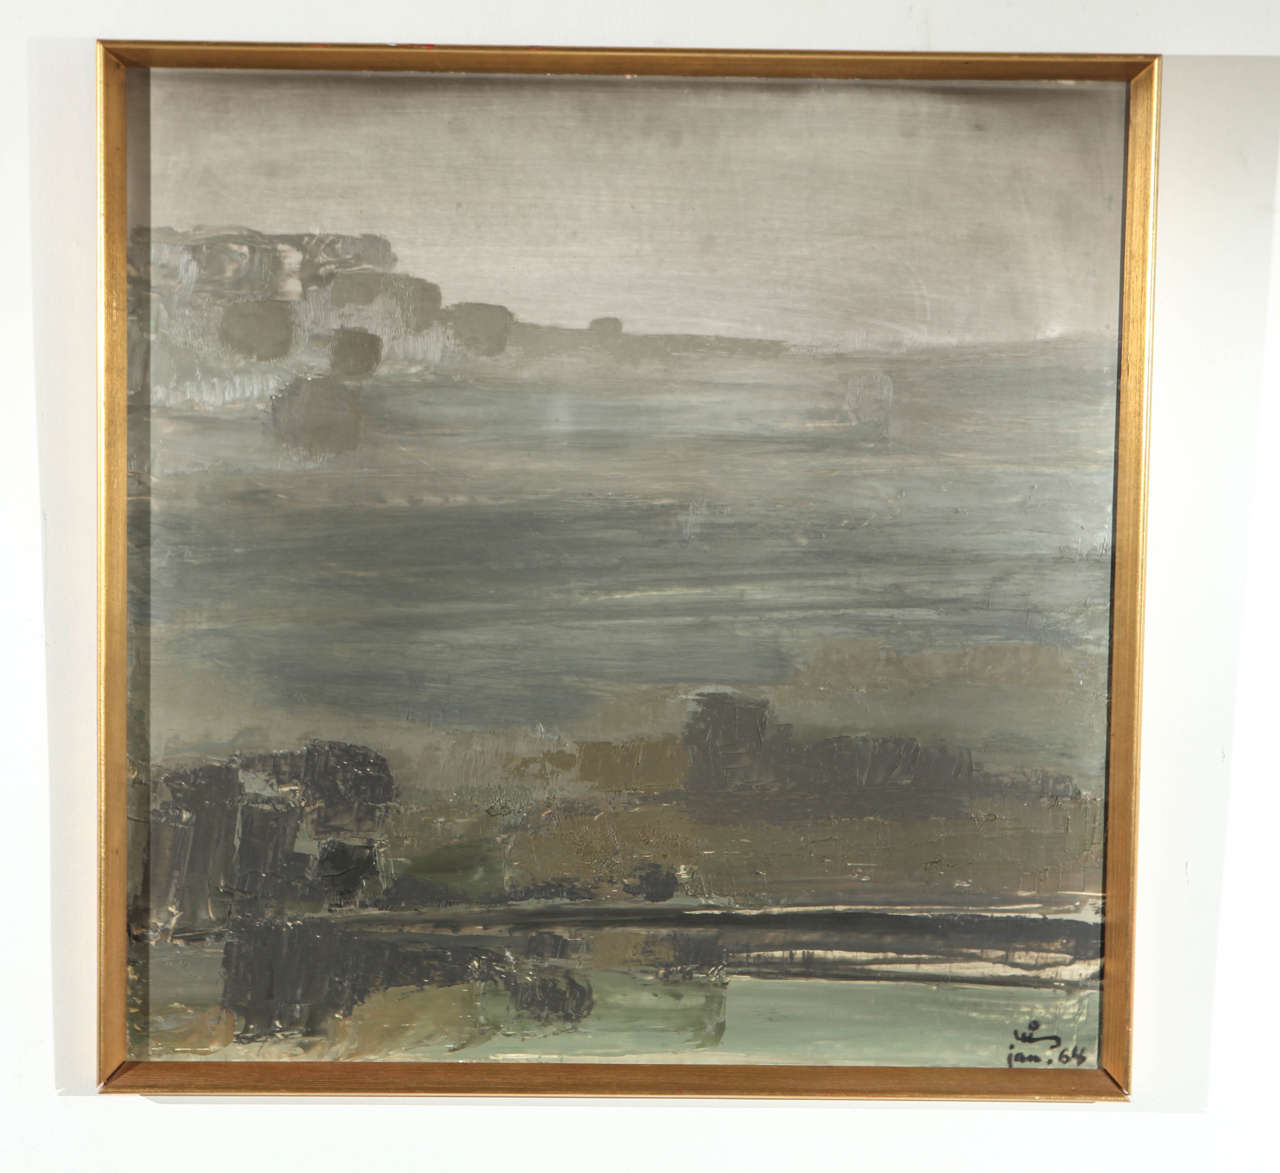 Somber but provocative landscape painting in gold frame. Signed 1964.